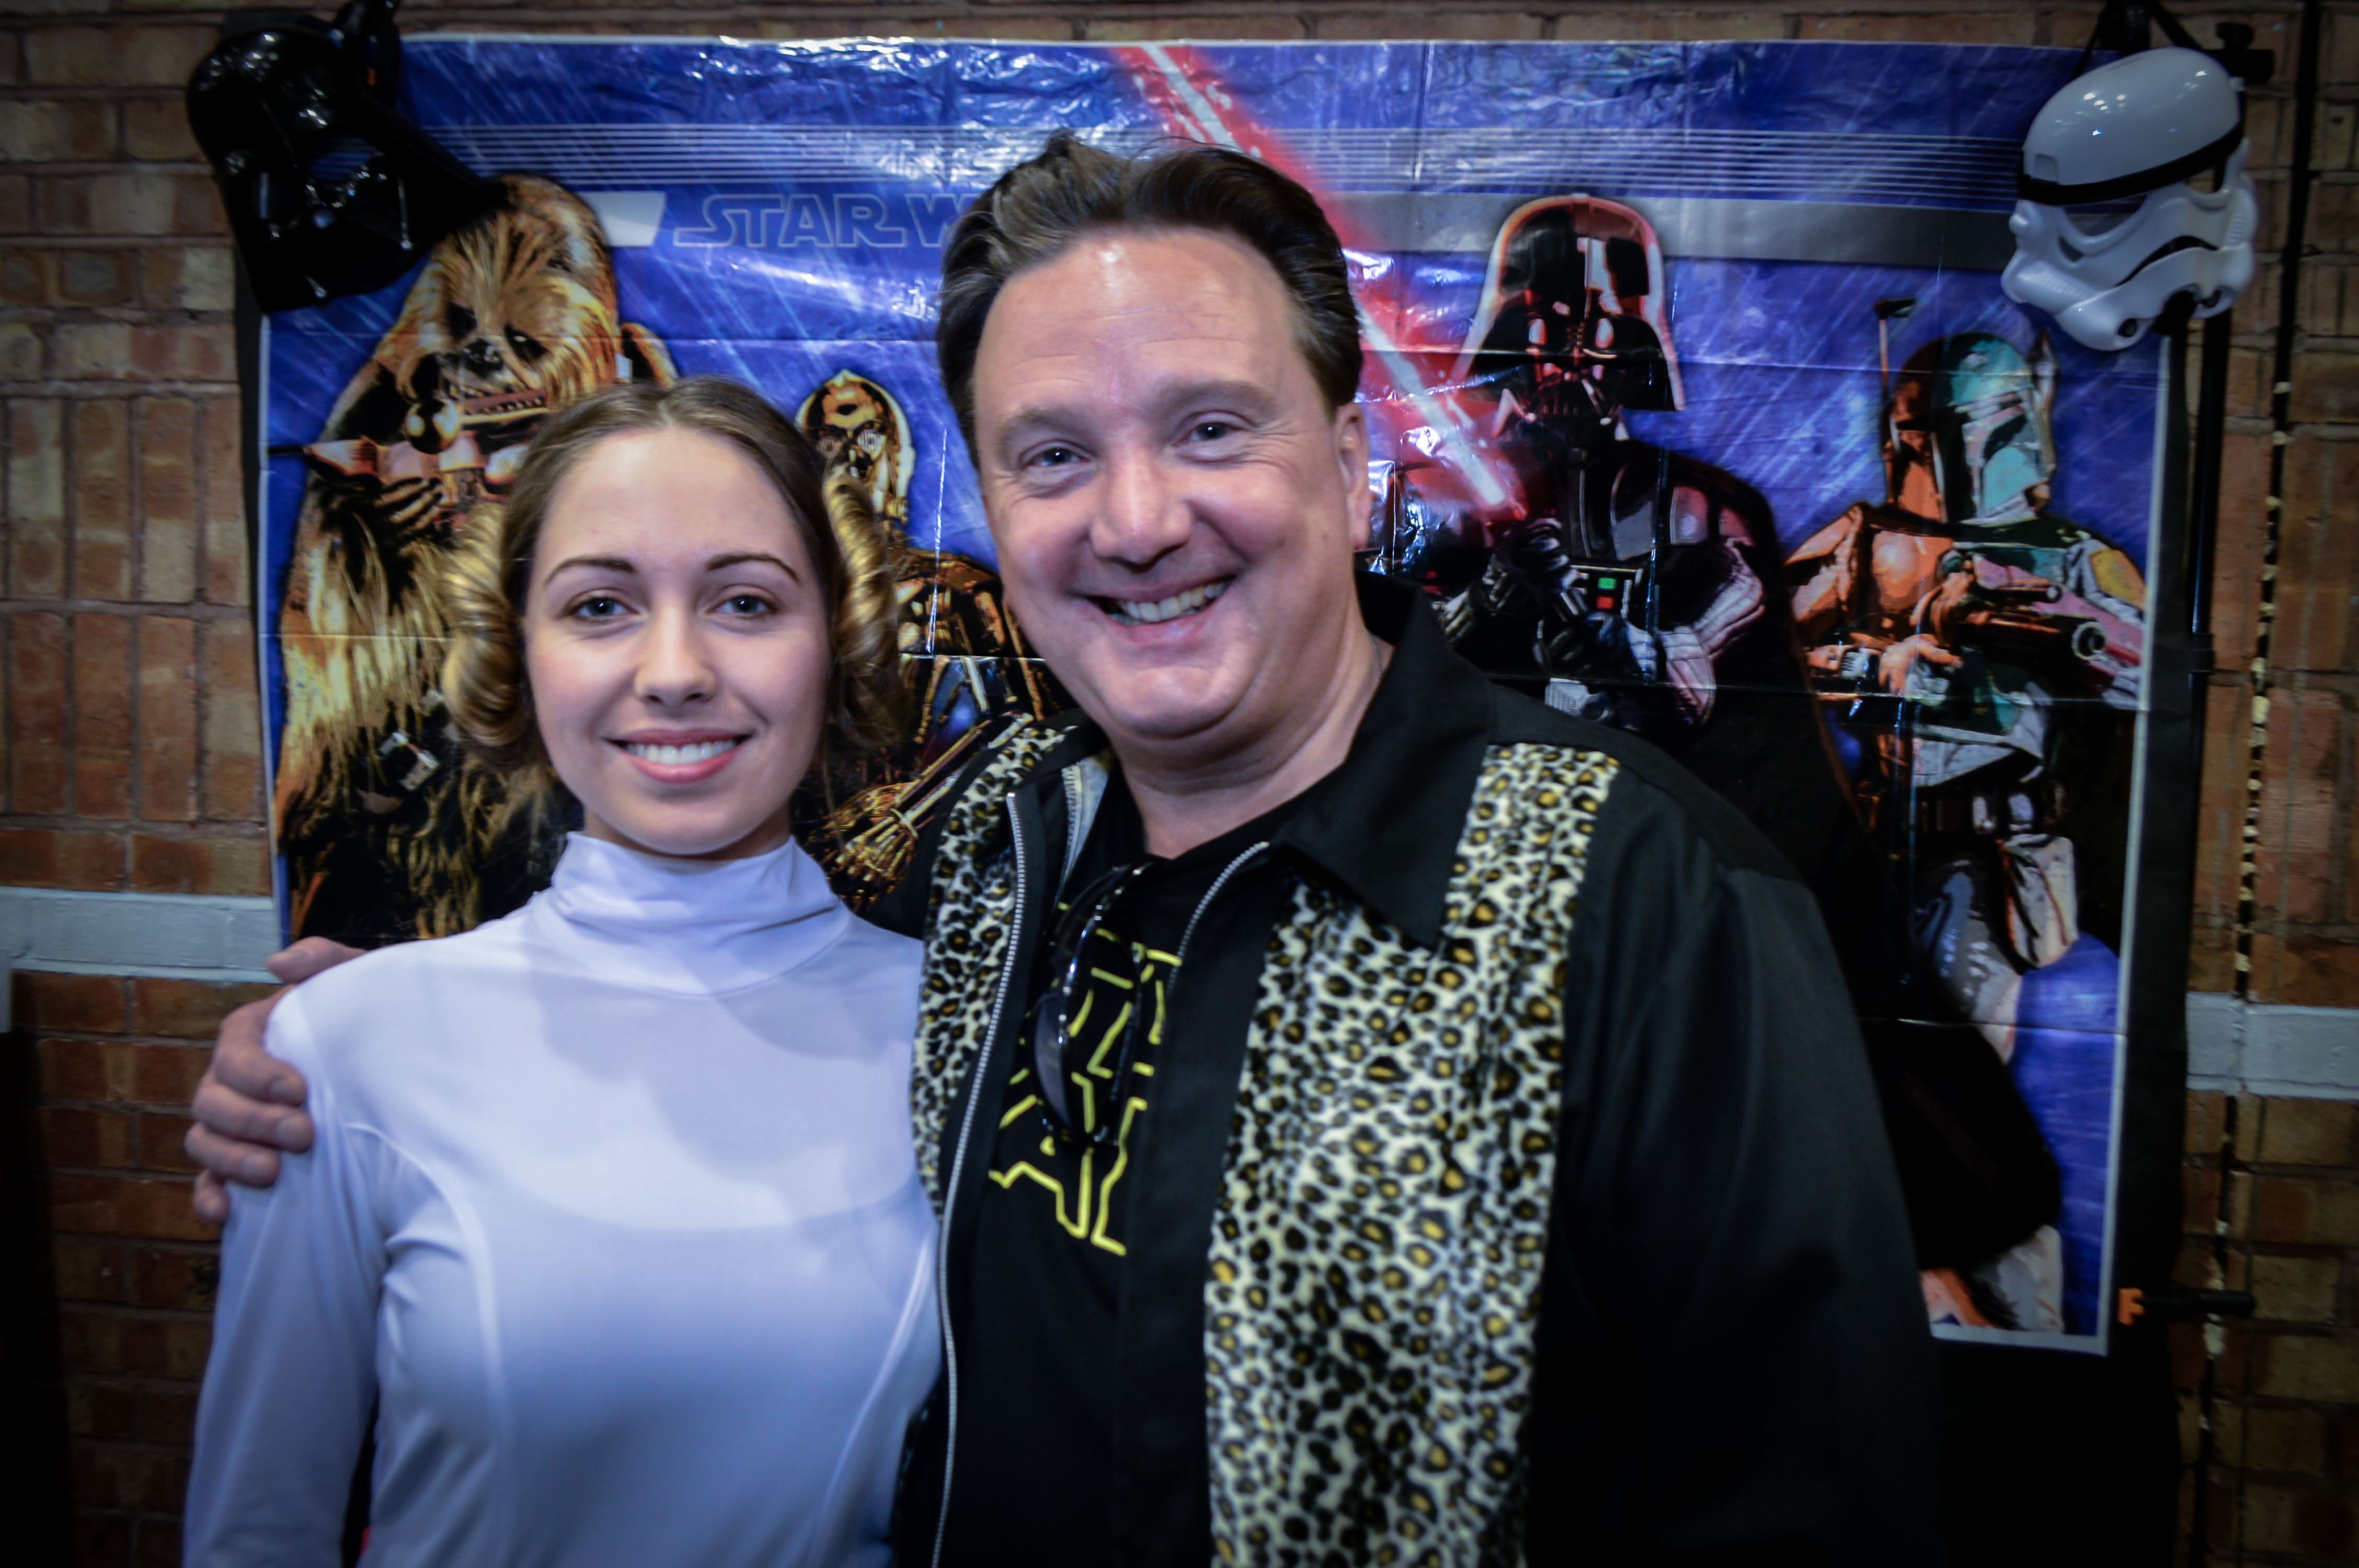 Princess Leia and Star Wars fan and me at a Convention April 2015